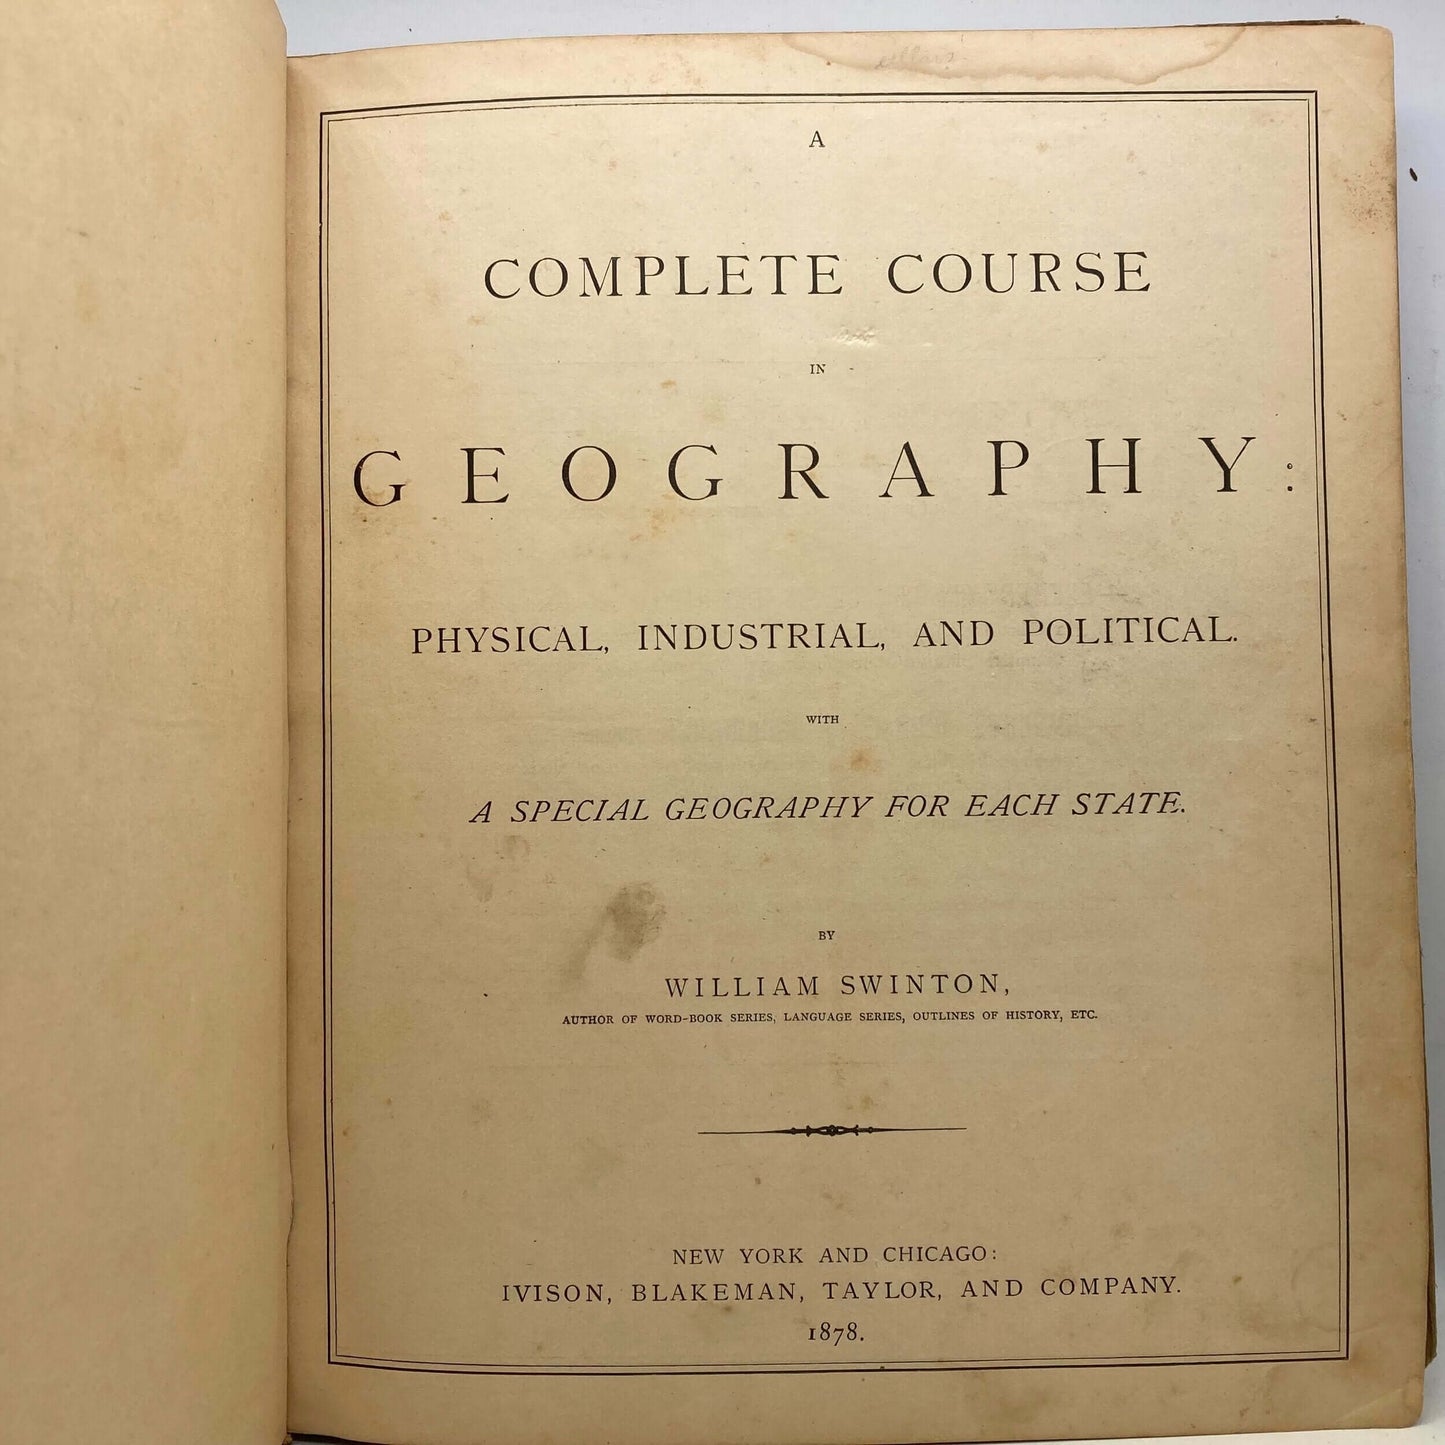 "Swinton's Complete Course in Geography" [Ivison, Blakeman, Taylor & Co, 1878] Atlas - Buzz Bookstore